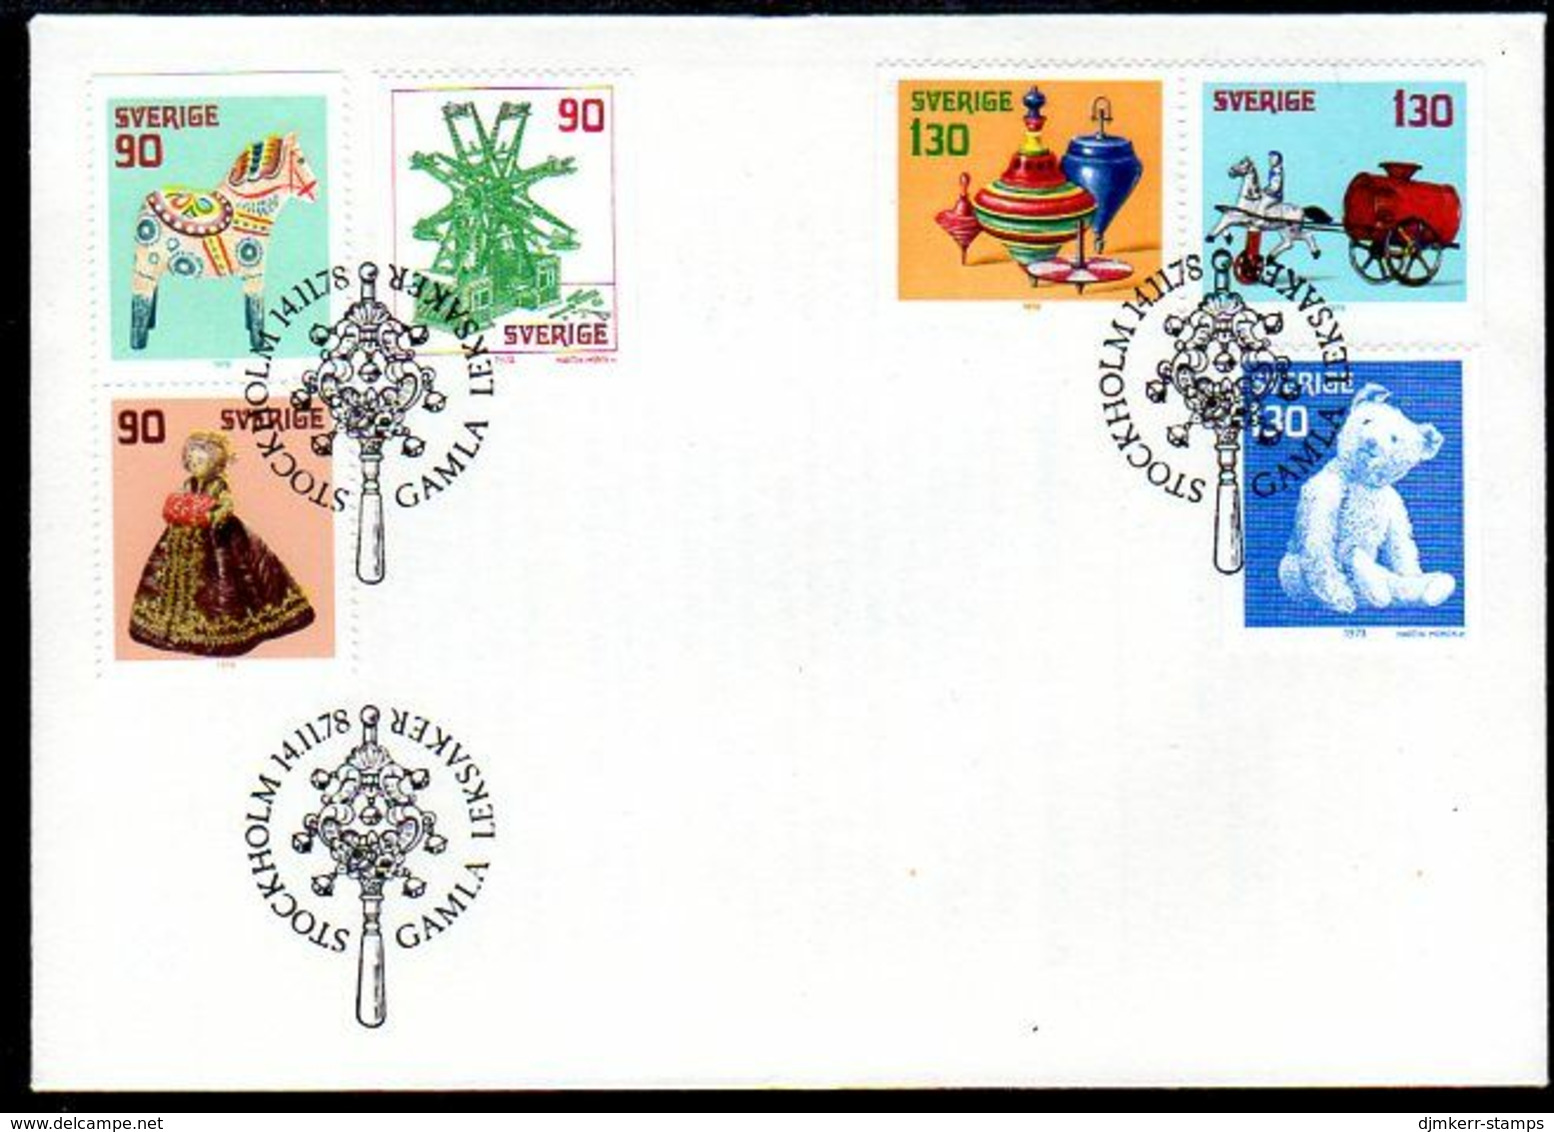 SWEDEN 1978 Christmas FDC.  Michel 1045-50 - FDC